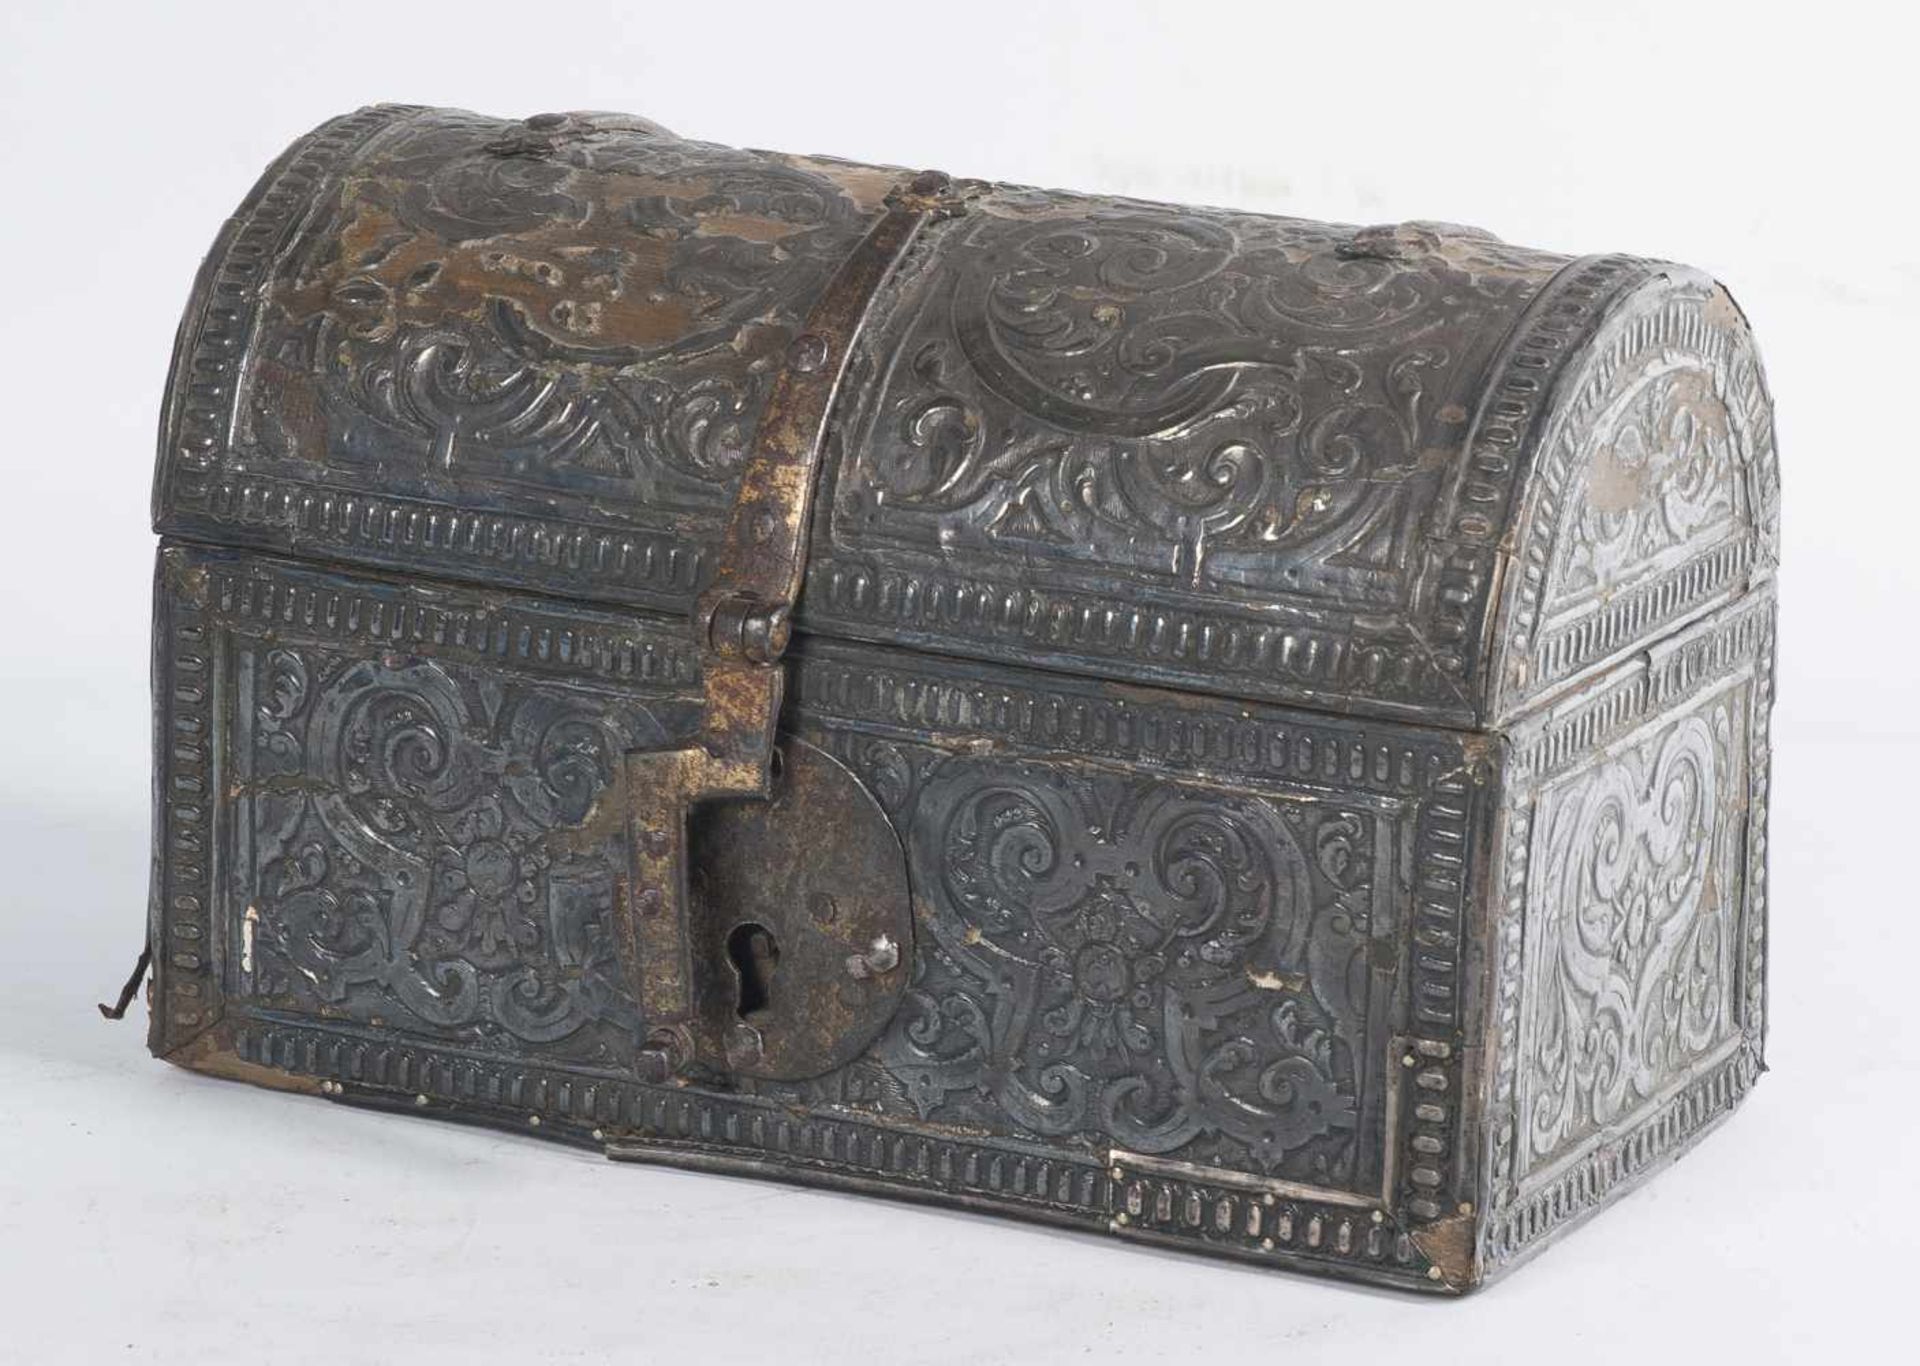 Small silver and gilded metal chest with iron fittings. Spain. 17th century. - Bild 2 aus 6